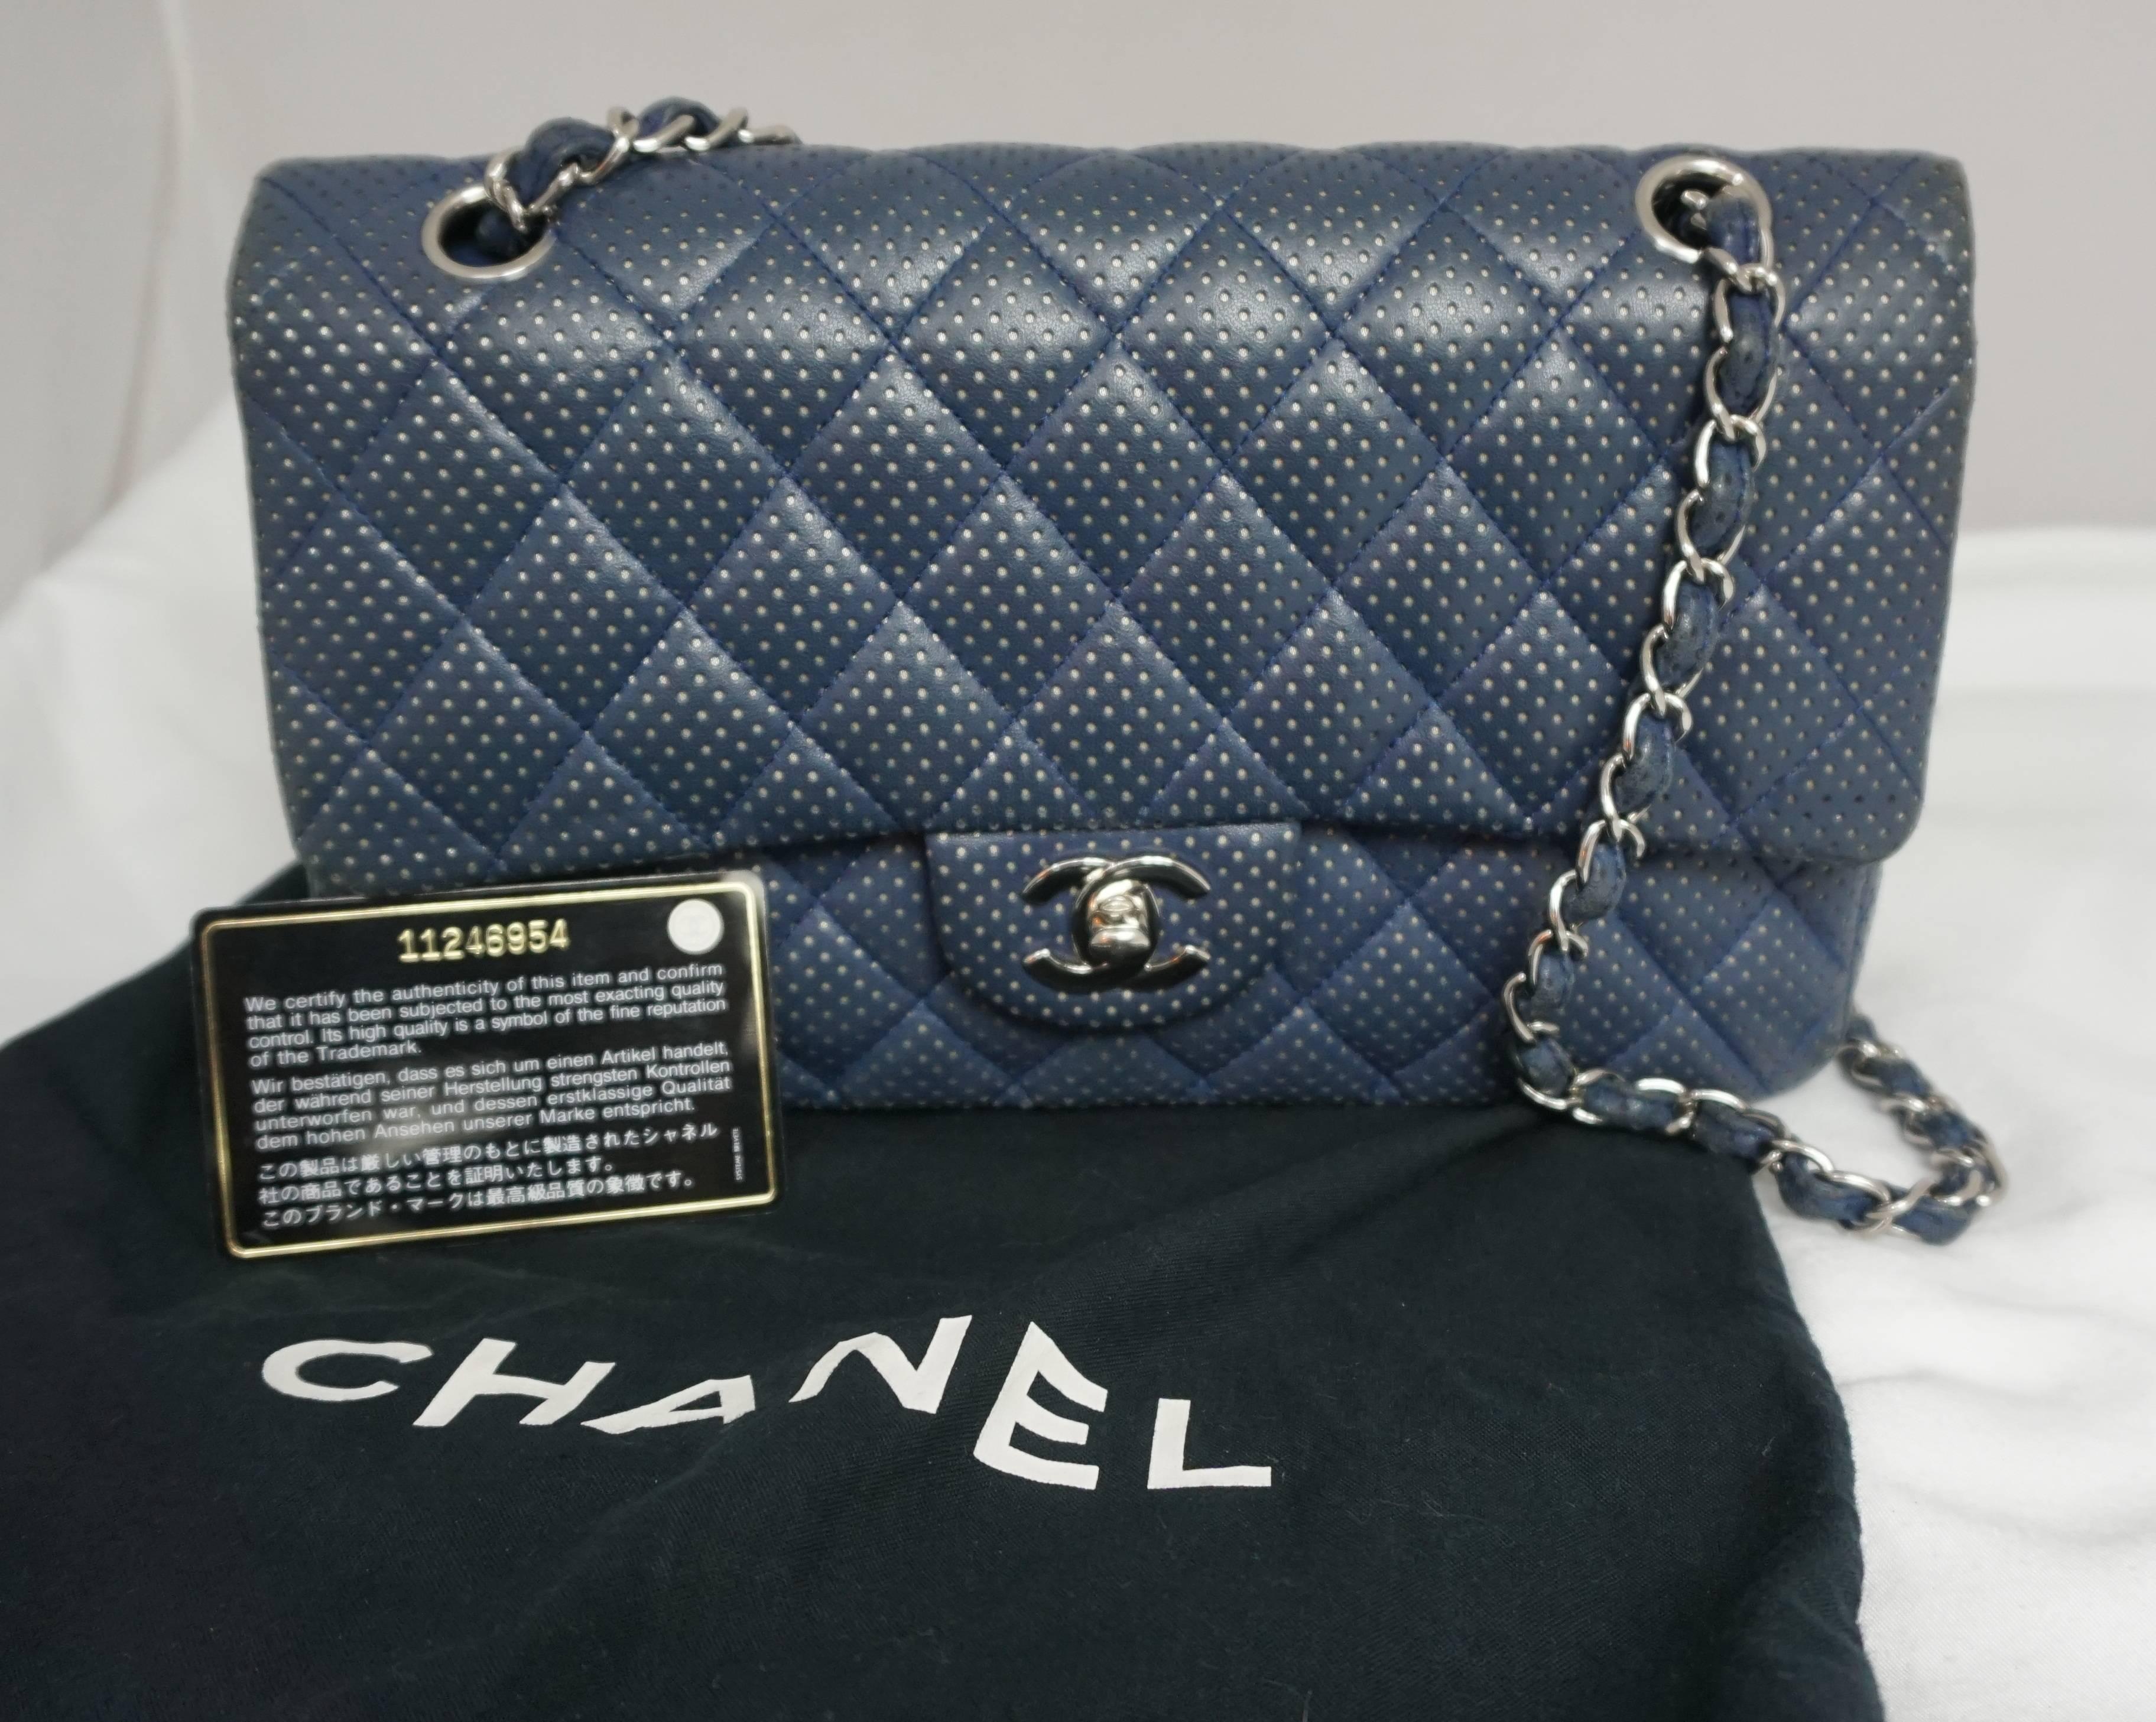 Chanel Blue/Silver Perforated Leather Medium Double Flap Handbag-SHW ...